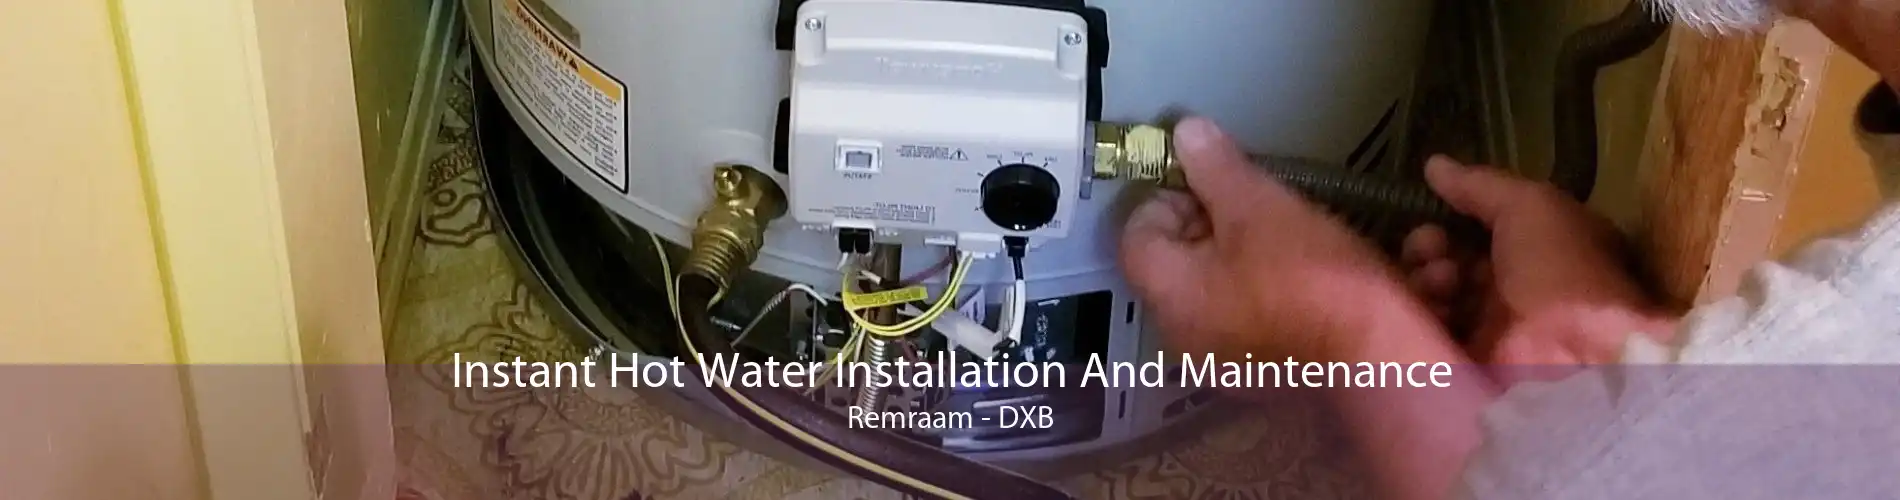 Instant Hot Water Installation And Maintenance Remraam - DXB